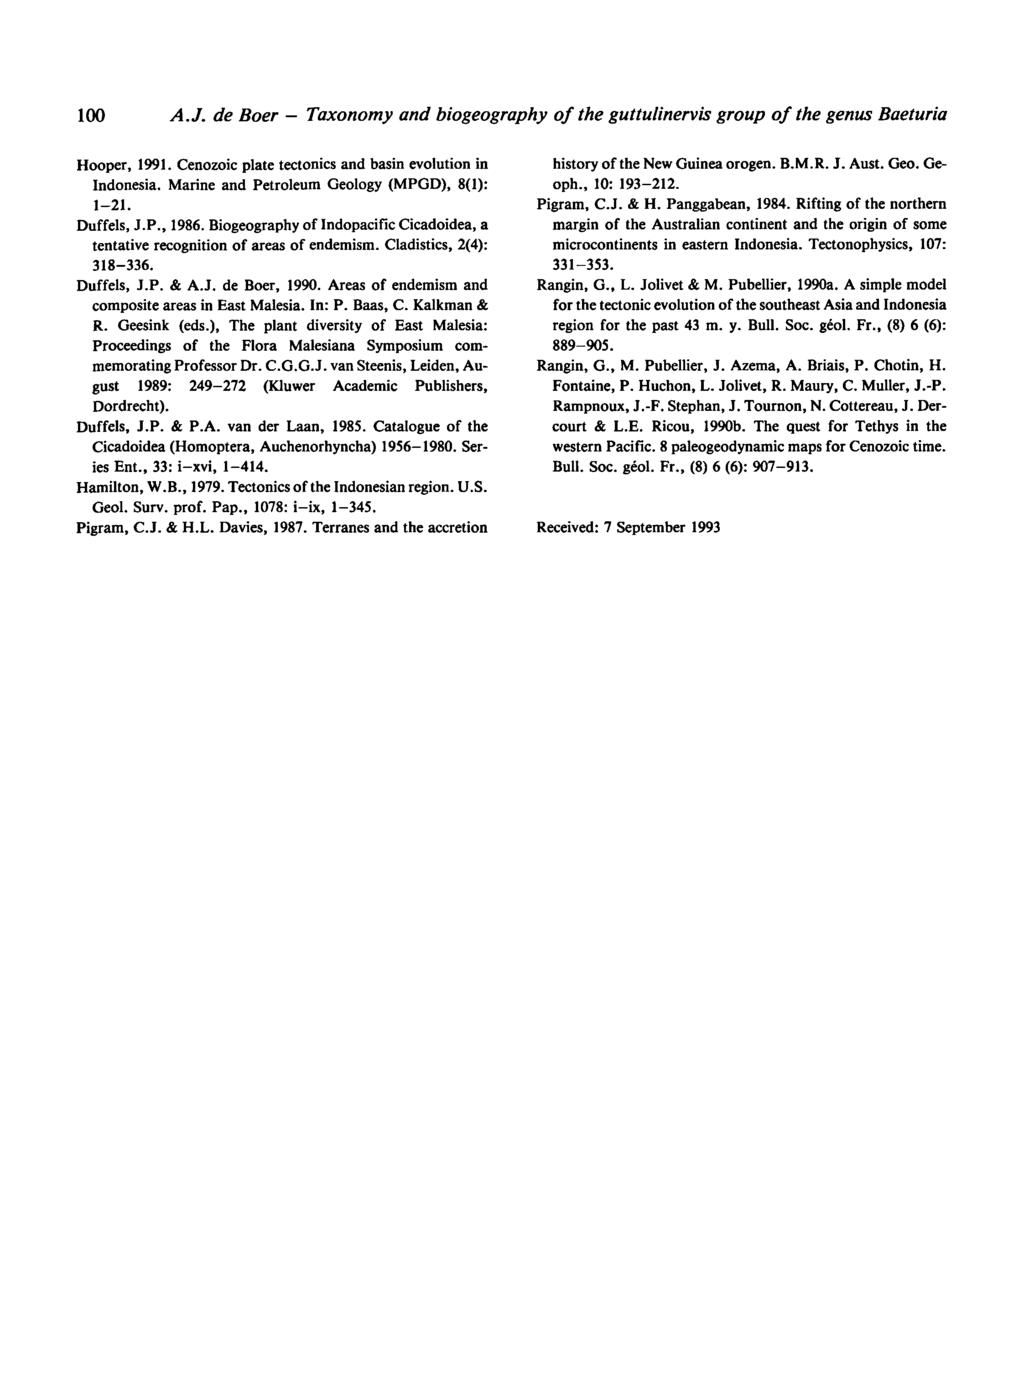 Taxonomy 100 and biogeography of the guttulinervis group of the genus Baeturia Hooper, 1991. Cenozoic plate tectonics and basin evolution in Indonesia. Marine and Petroleum Geology (MPGD), 8(1): 121.